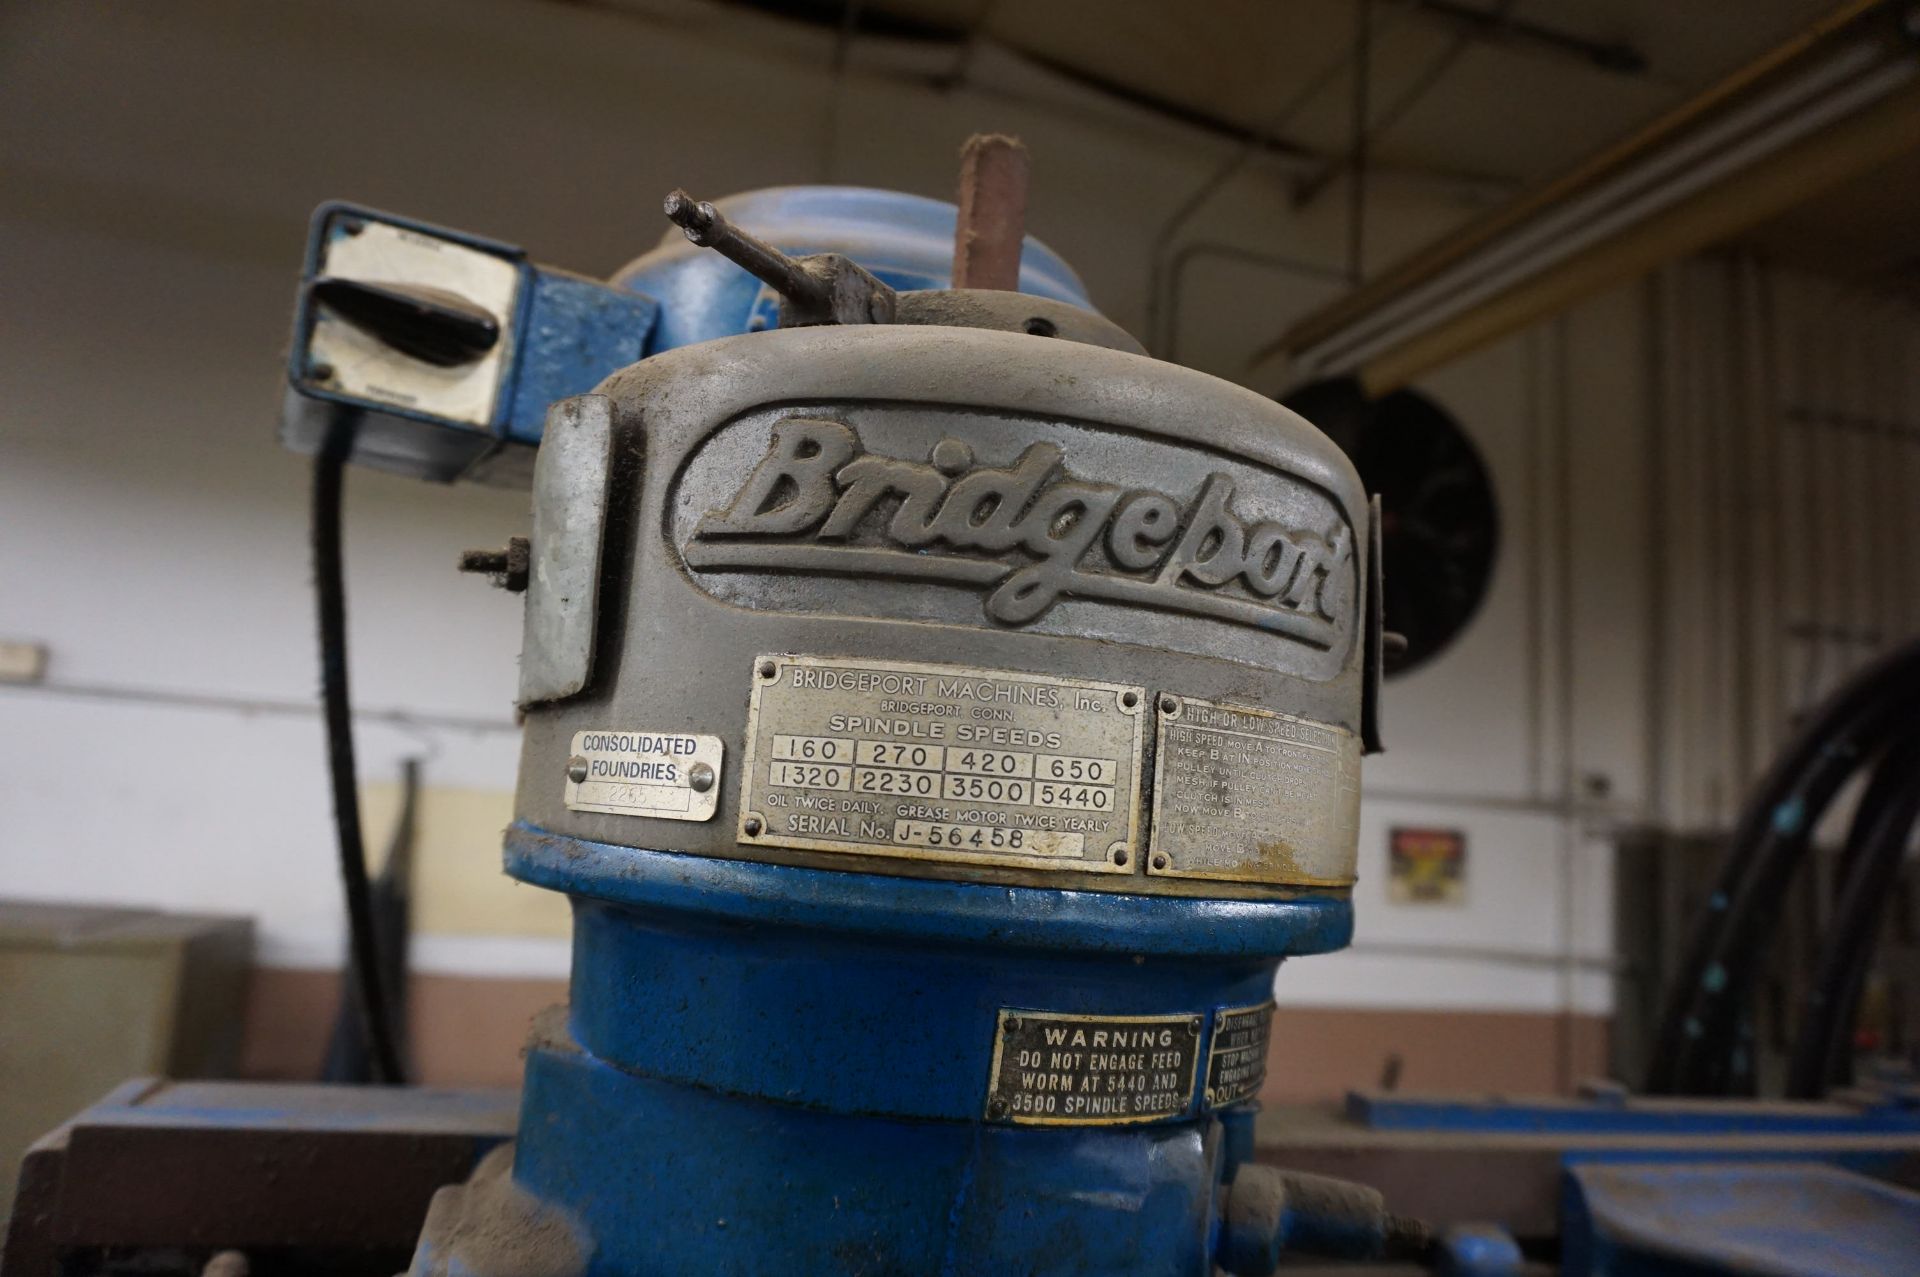 BRIDGEPORT MILLING MACHINE S/N J-56458 WITH TRUE-TRACE B-360/3D MODEL 1090 *NOT RUNNING* **Rigging - Image 4 of 6